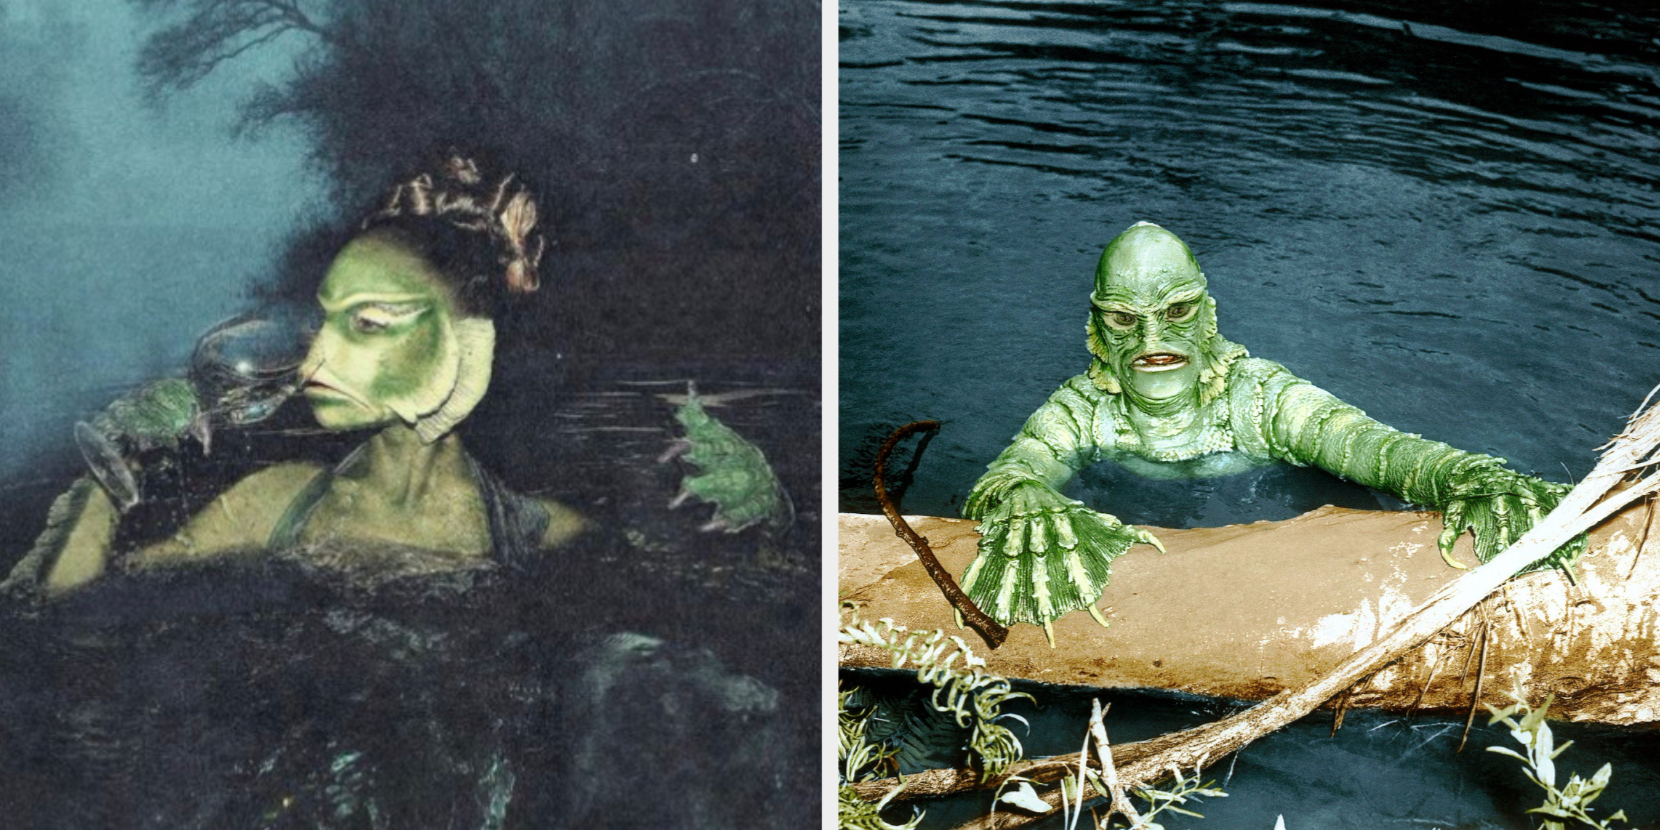 Creature from the Black Lagoon Mug — Pudgy Productions